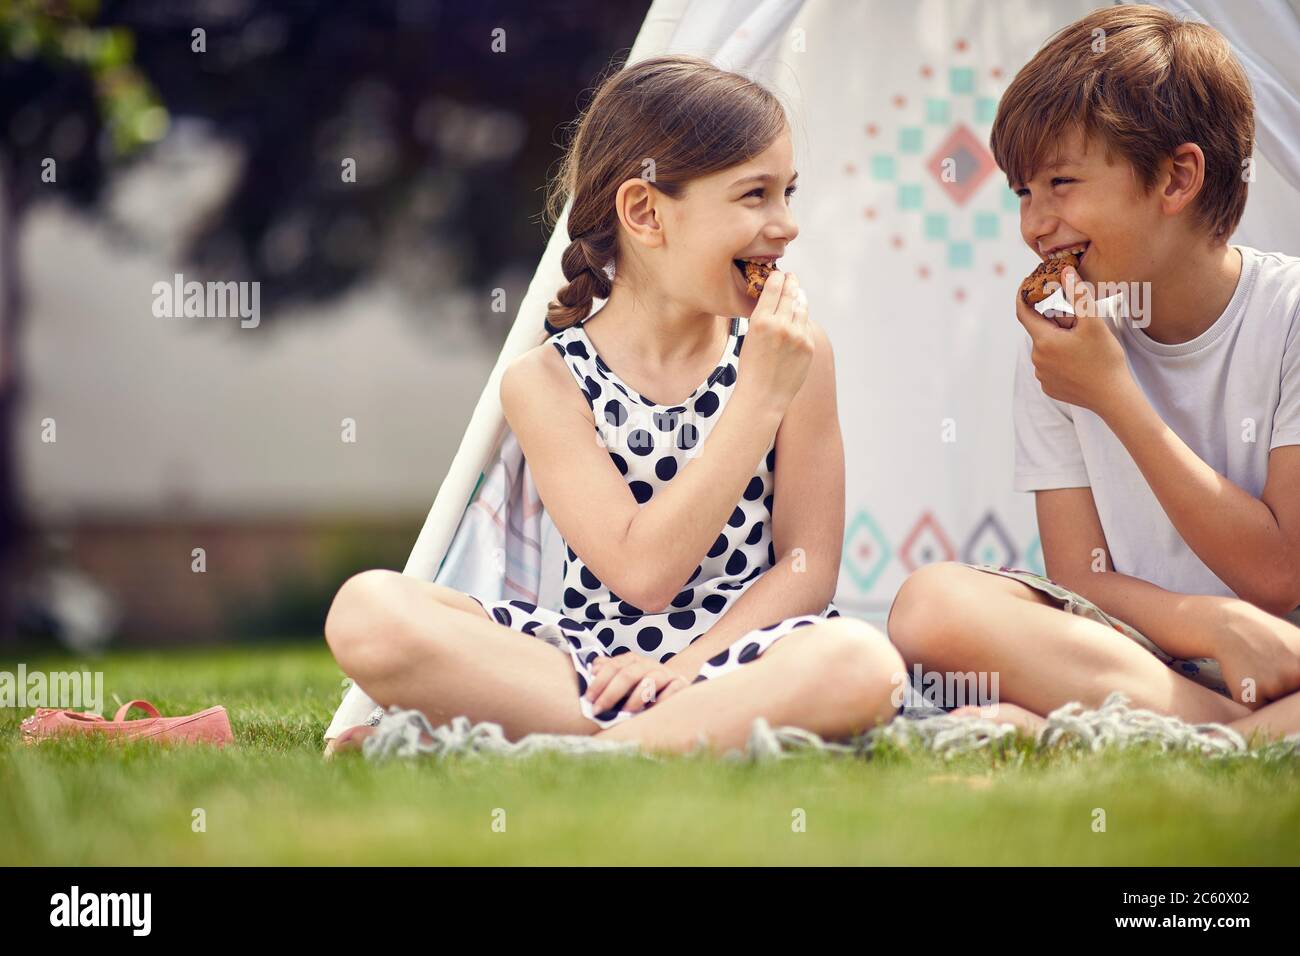 Summer time fun. Smiling kids playing at backyard in teepee and eats cookies. Stock Photo